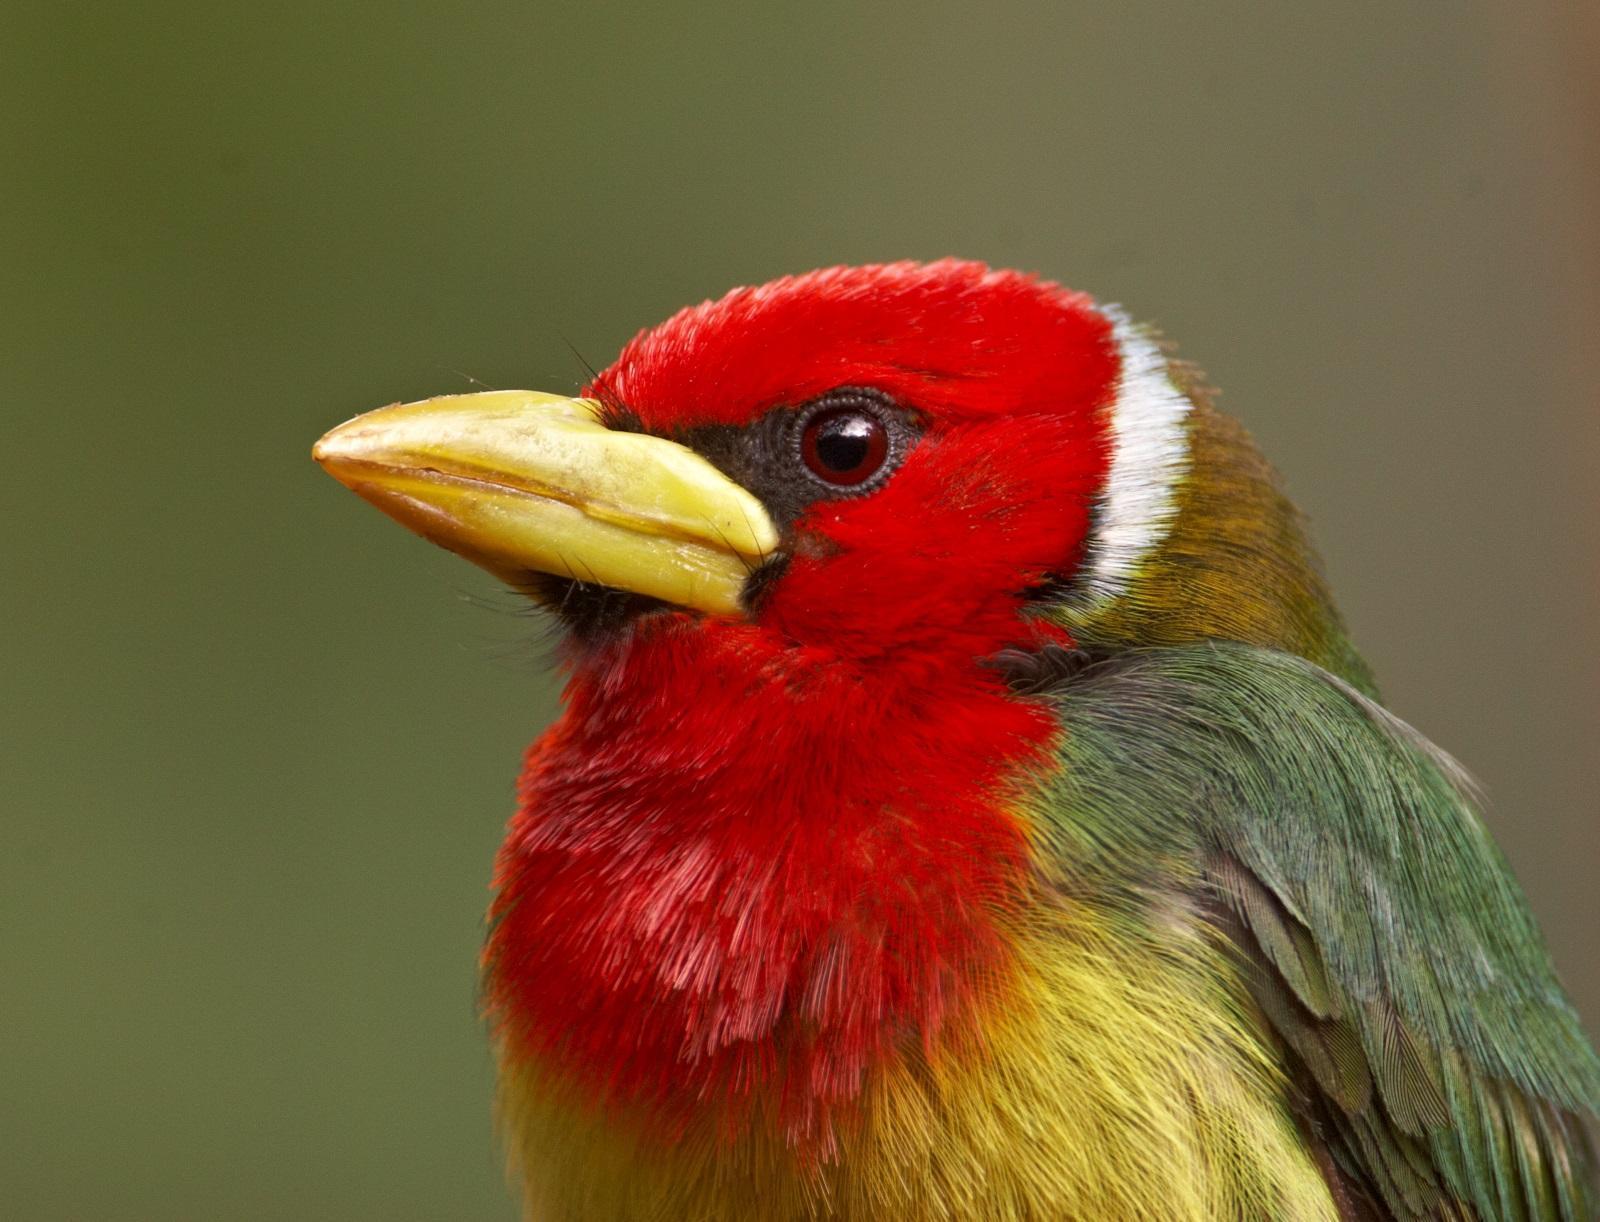 Red-headed Barbet Photo by Chris Fagyal